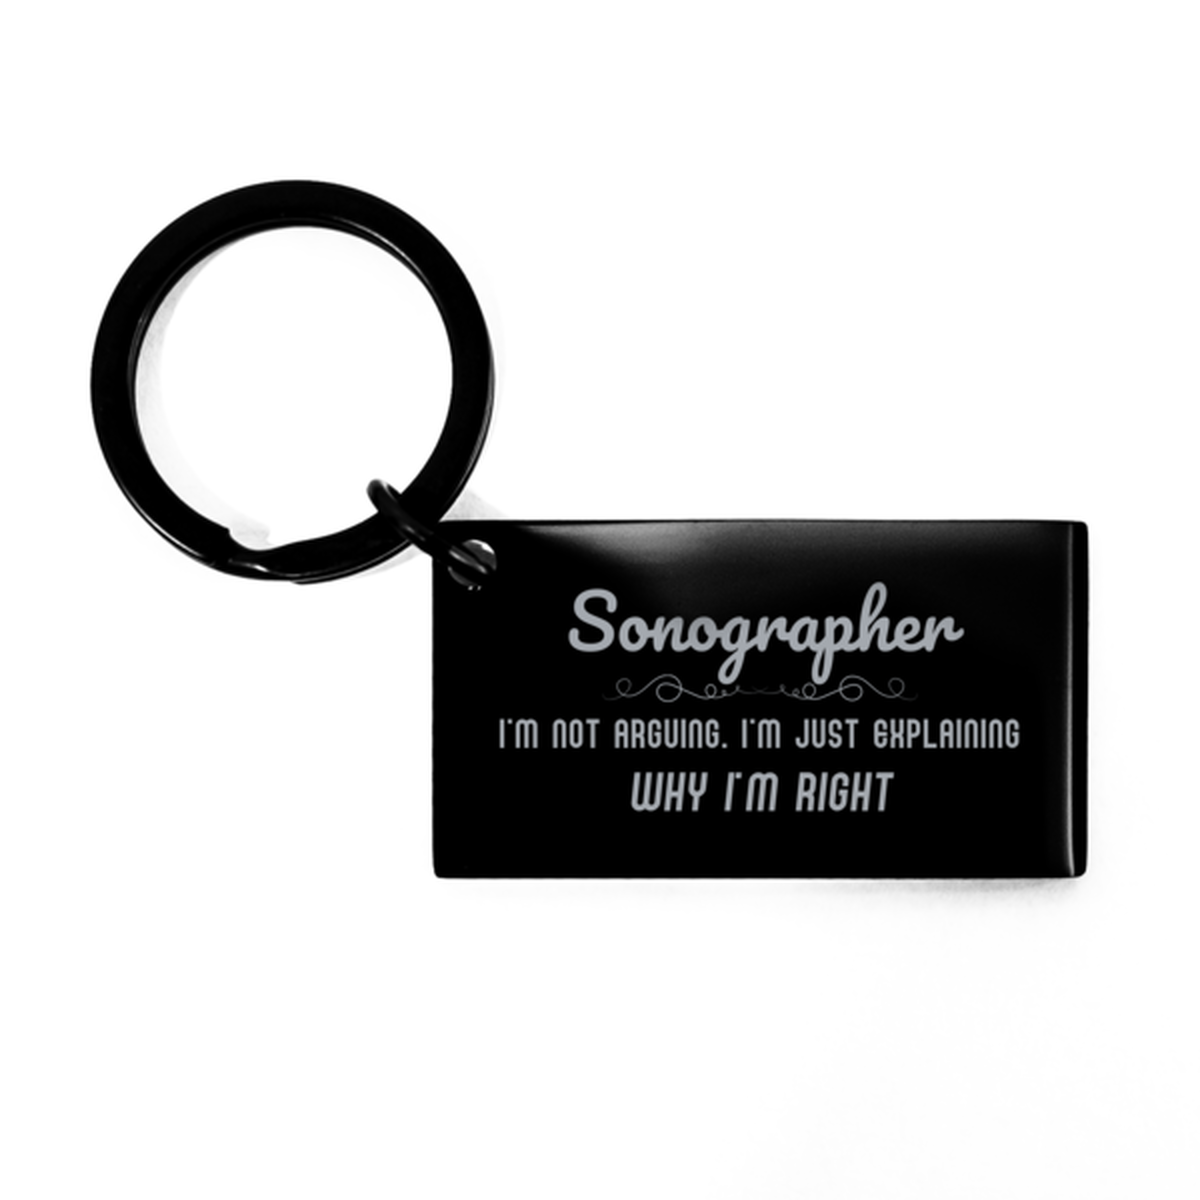 Sonographer I'm not Arguing. I'm Just Explaining Why I'm RIGHT Keychain, Funny Saying Quote Sonographer Gifts For Sonographer Graduation Birthday Christmas Gifts for Men Women Coworker